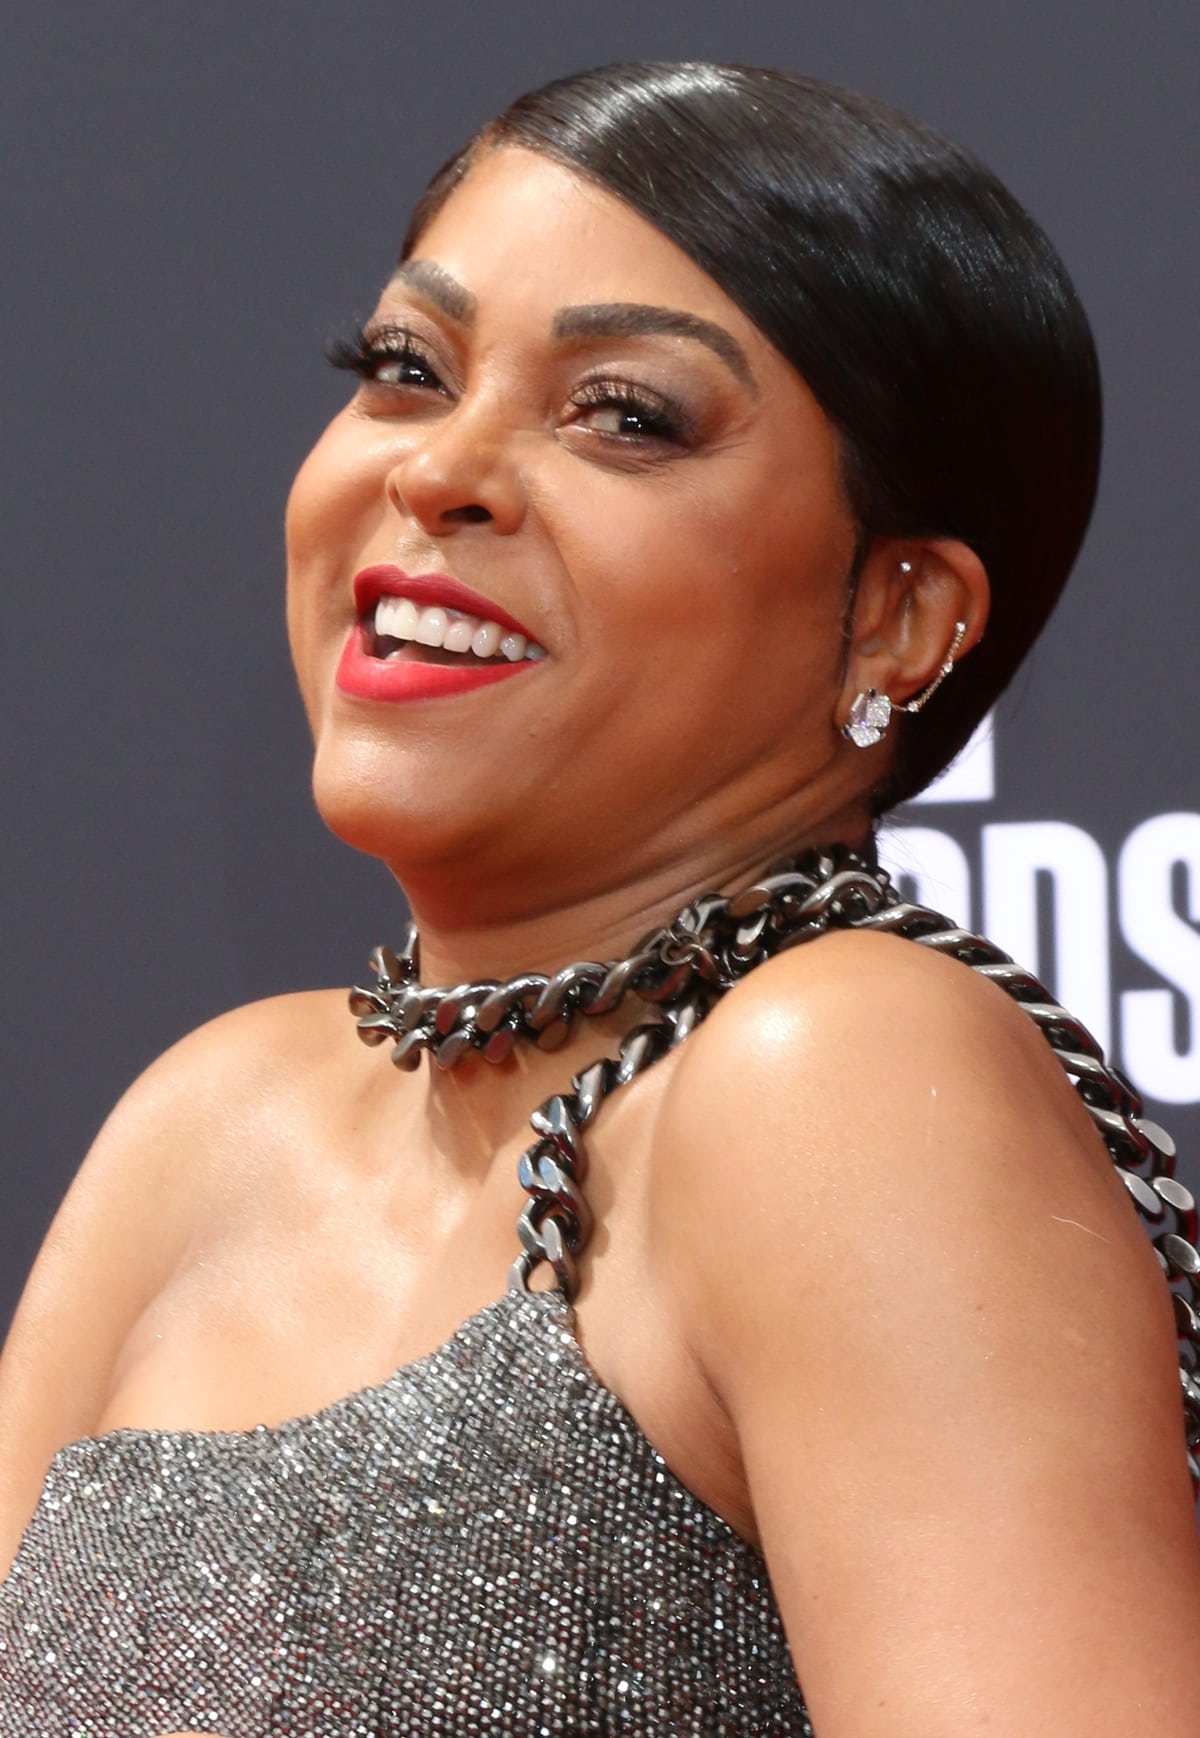 Taraji P. Henson's mitochondrial DNA analysis revealed her matrilineal lineage tracing back to the Masa people of Cameroon, and she has also acknowledged her connection to Matthew Henson, the North Pole explorer, as the brother of her great-great-grandfather